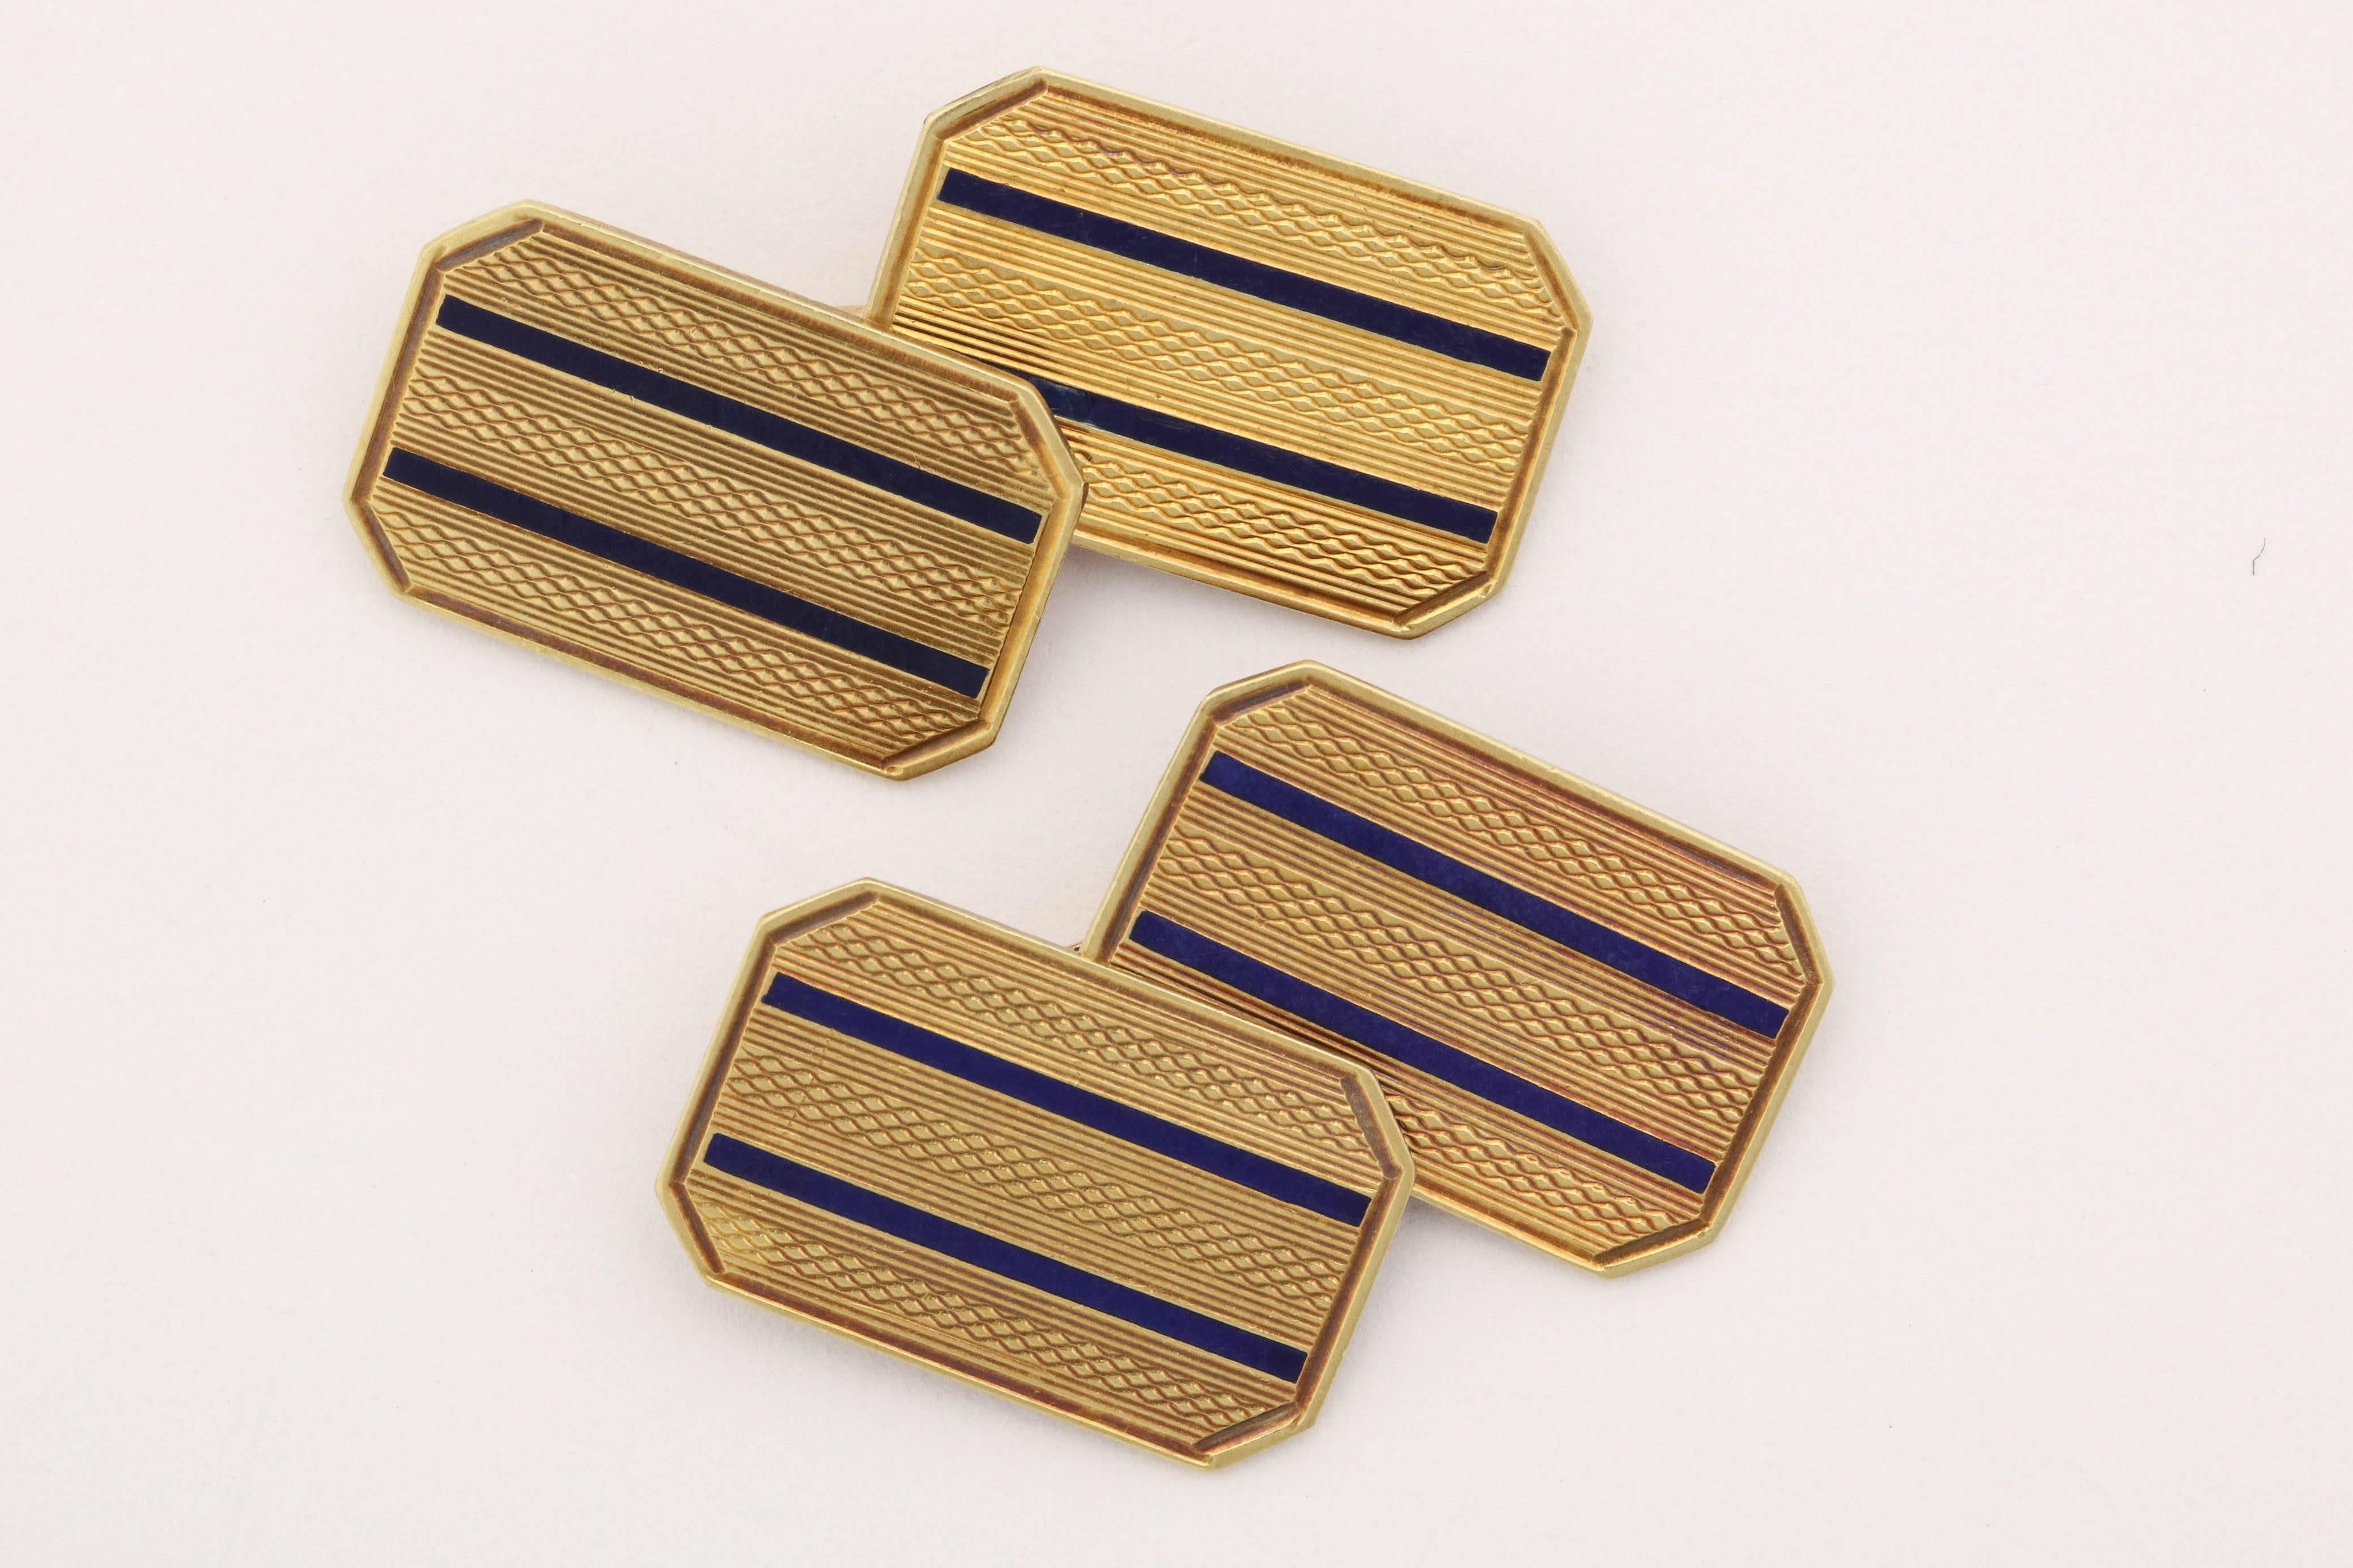 American Art Deco 14 Karat Yellow Gold and Guilloche Enamel Cufflinks In Excellent Condition For Sale In New York, NY